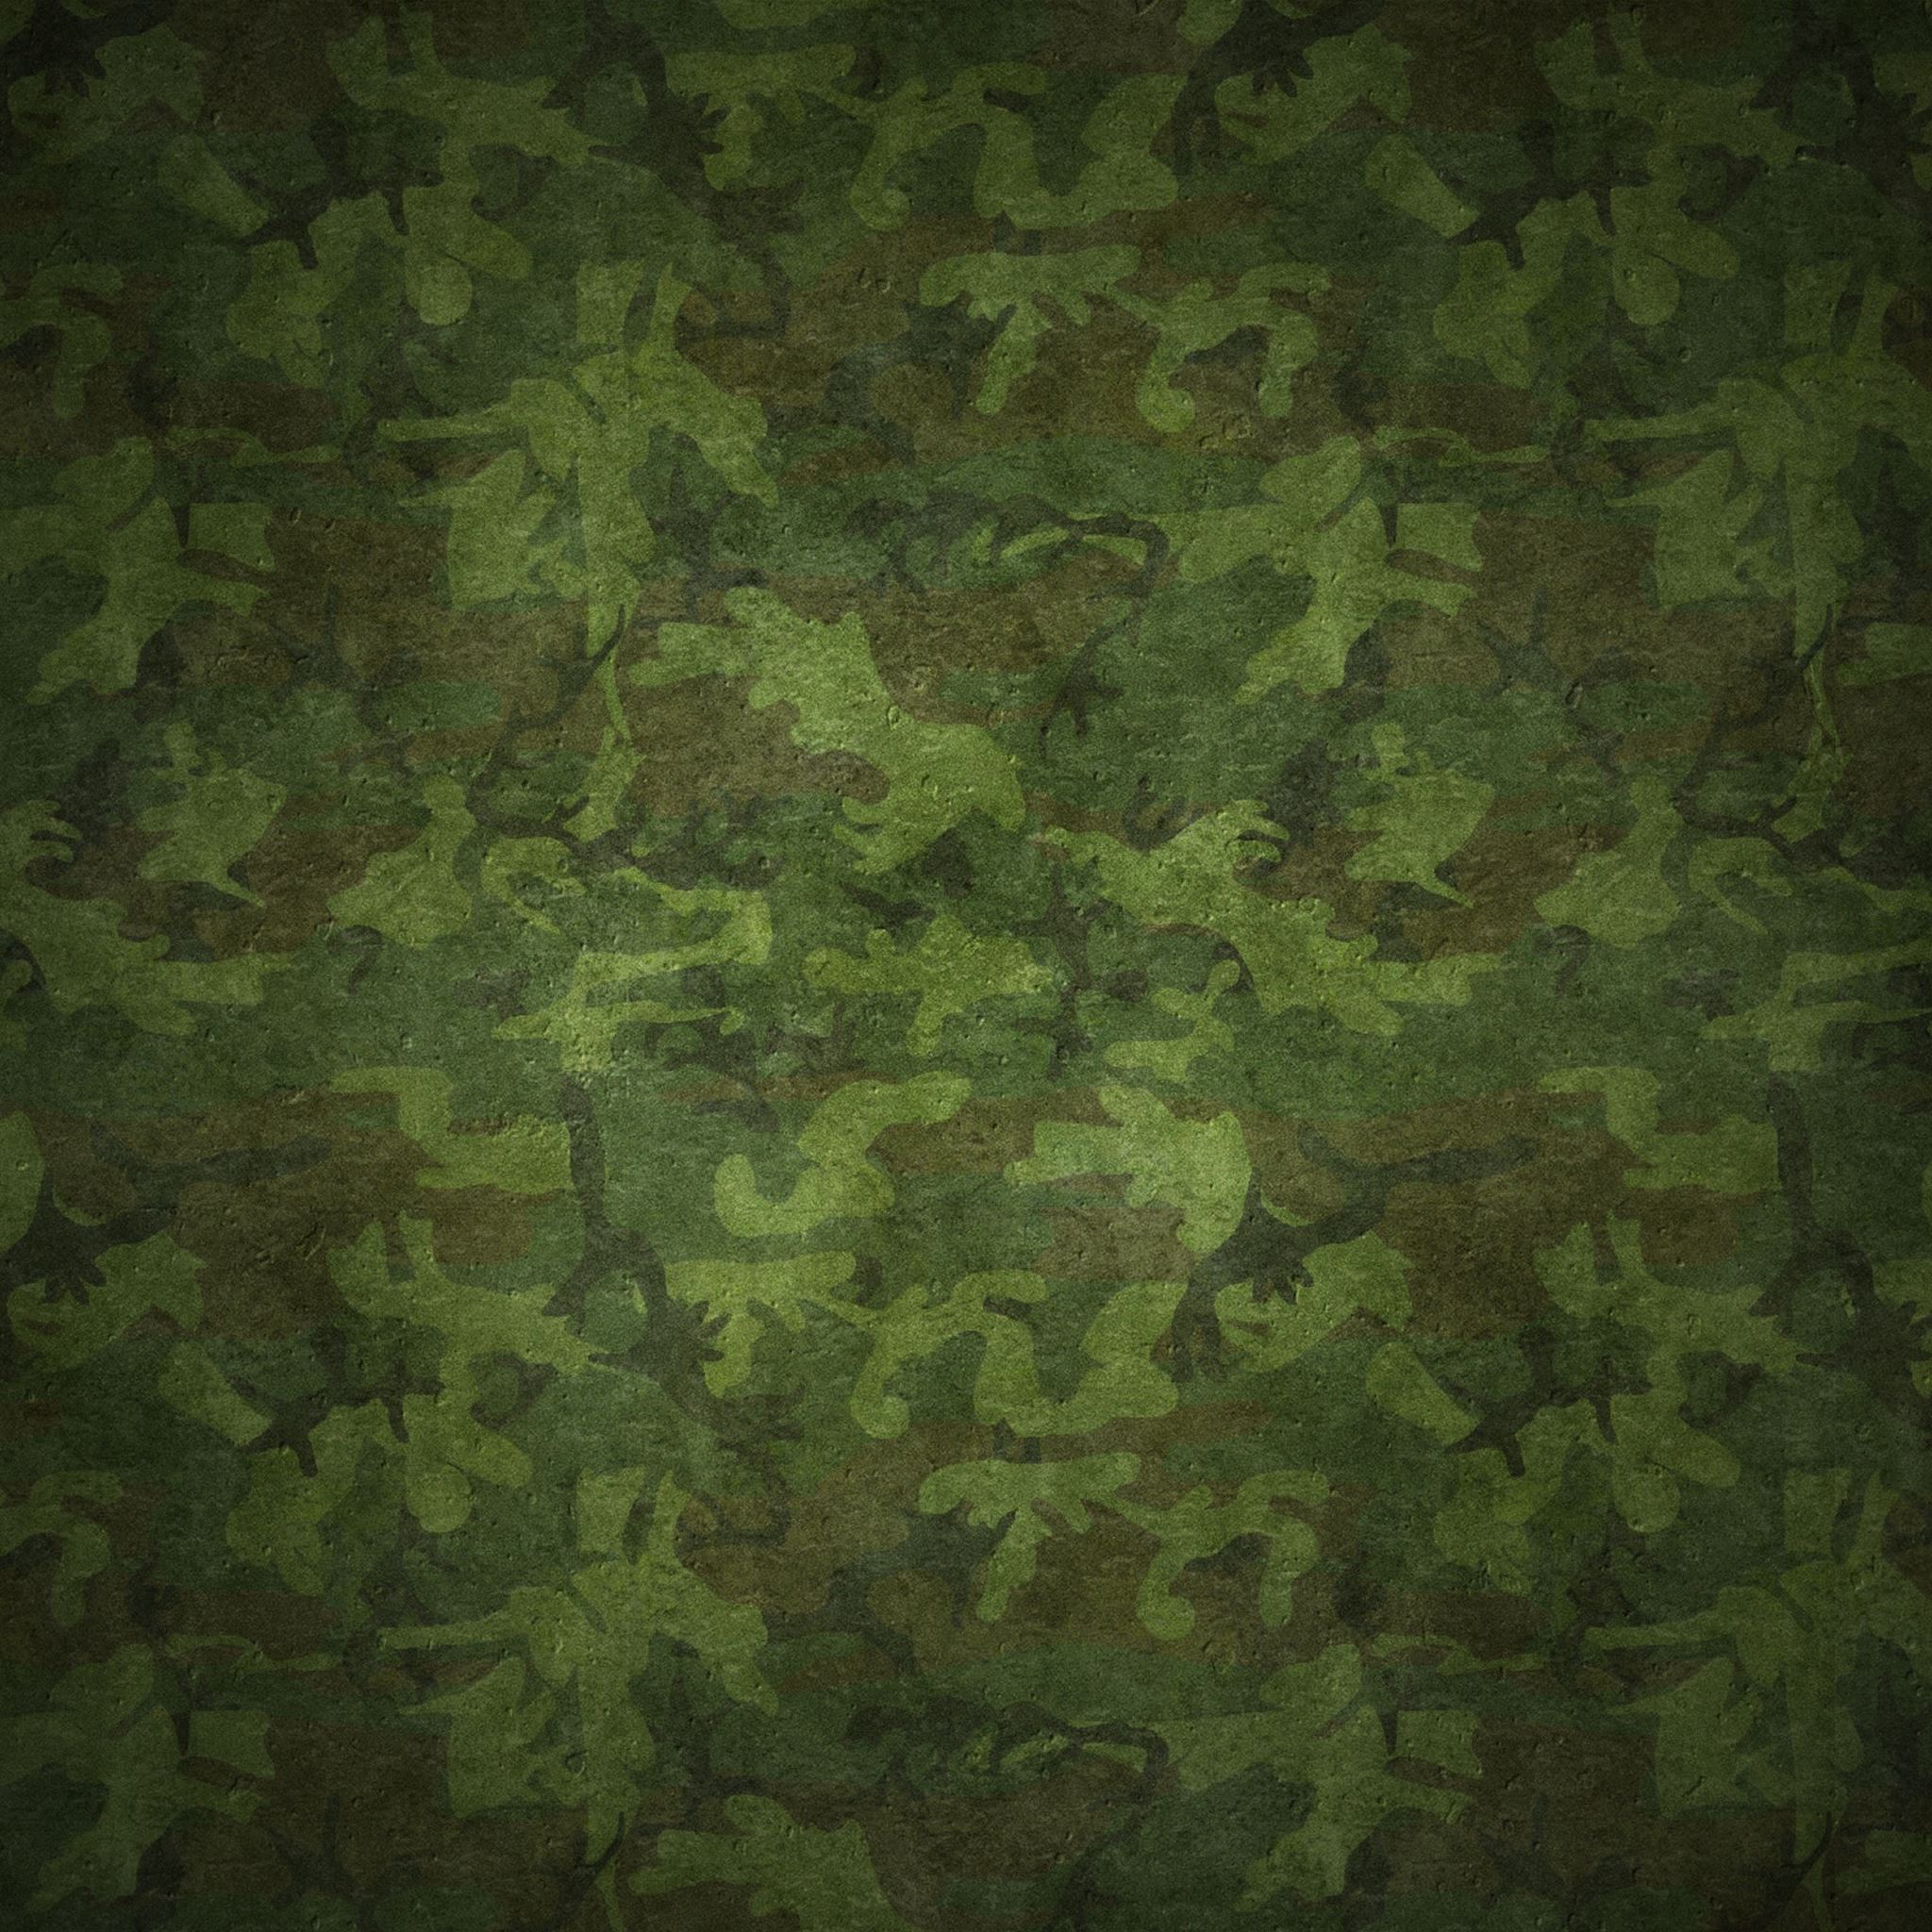 Military Camouflage Patterns iPad Air Wallpaper Free Download